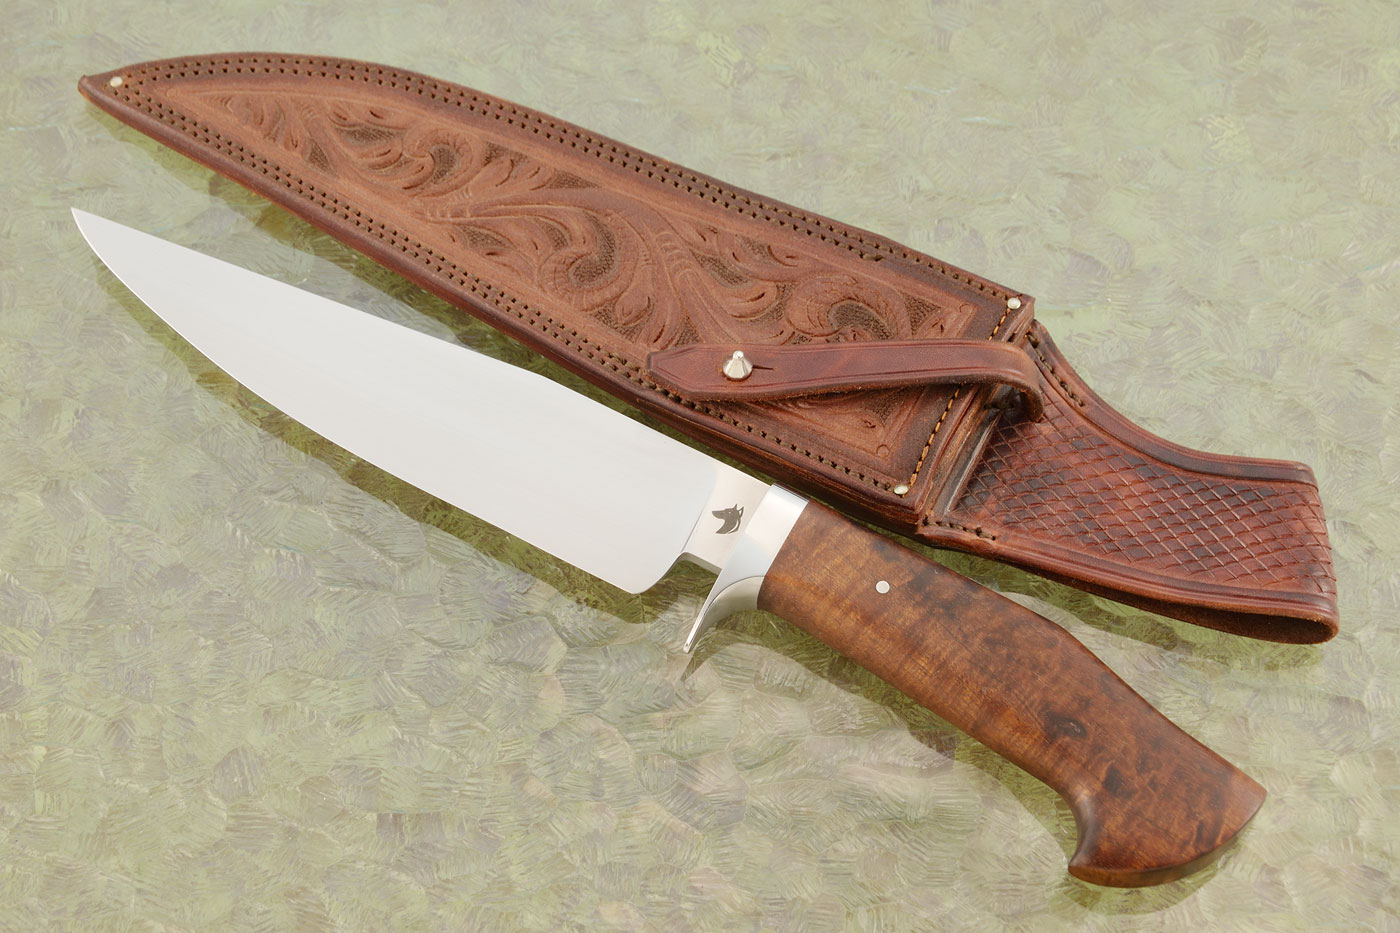 Clip Point Bowie with Curly Koa